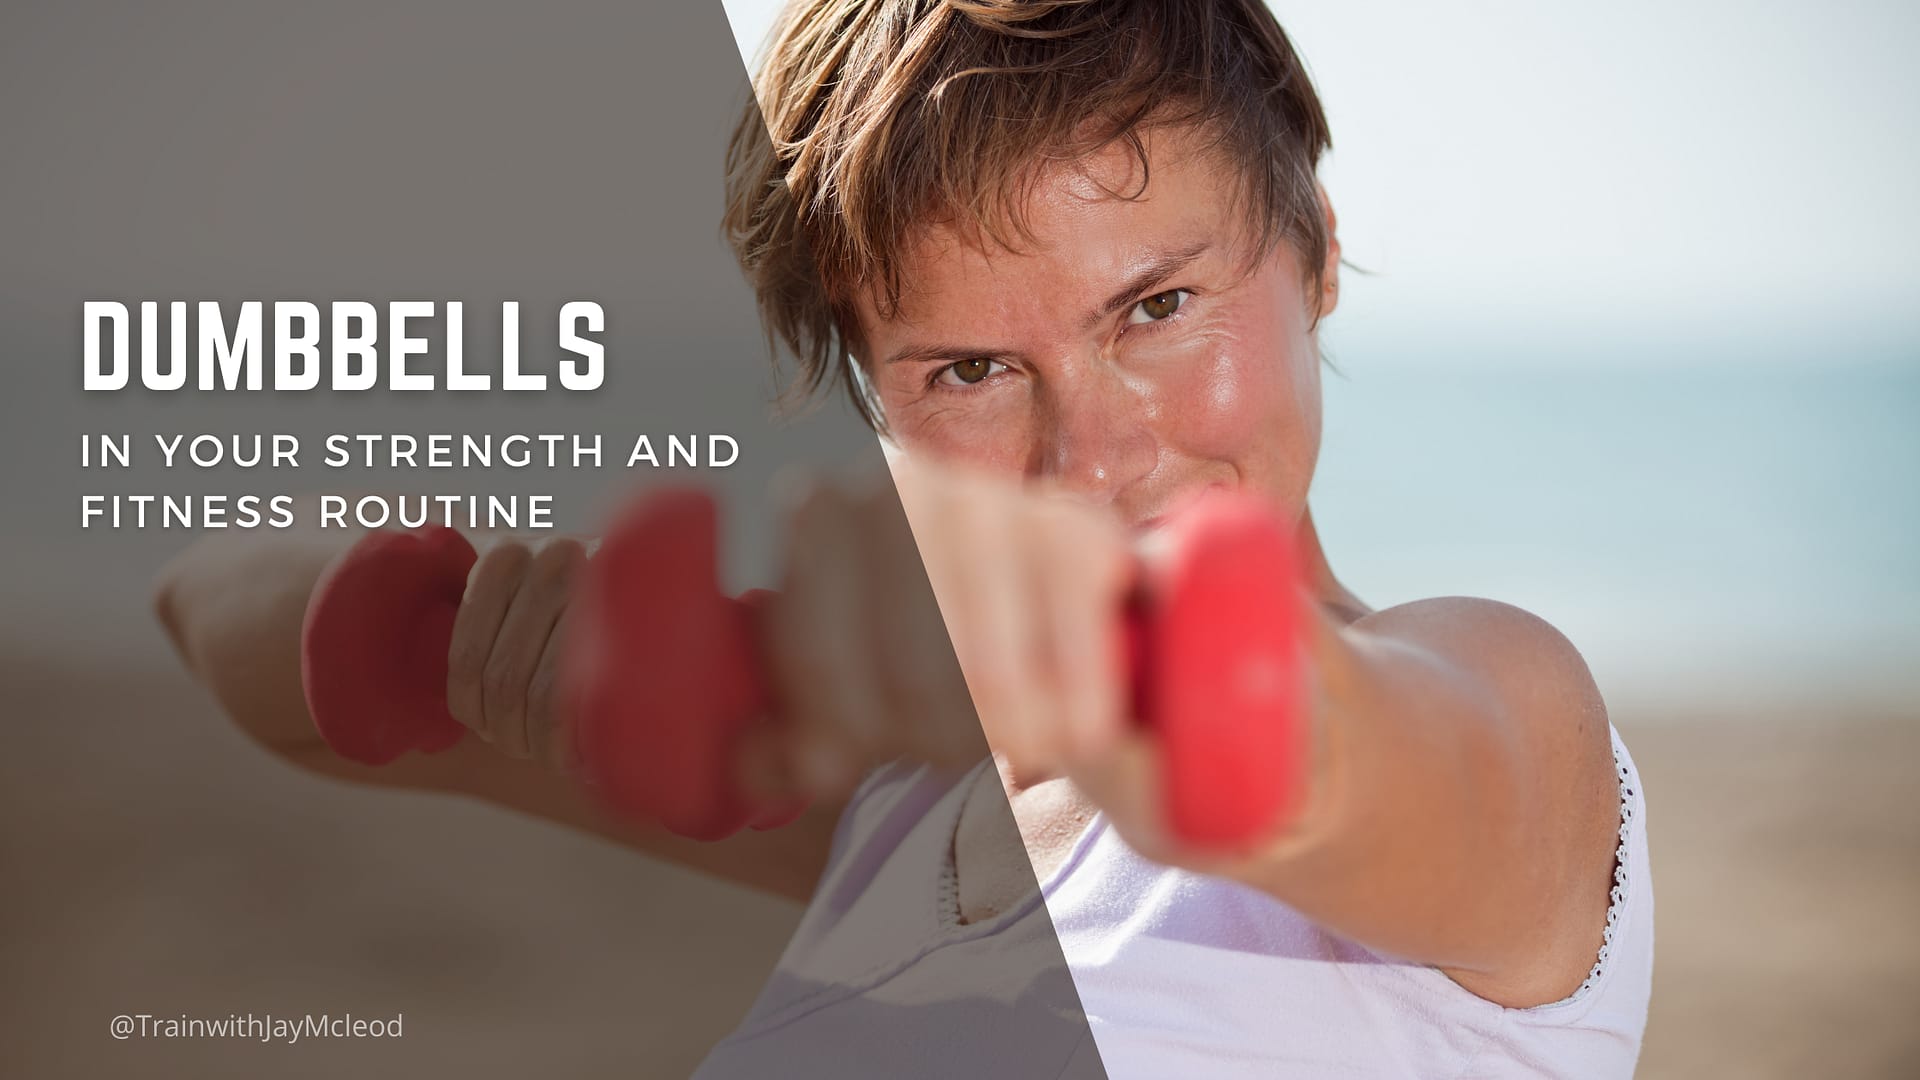 Dumbbells in Your Fitness Routine | Personal Training in Burbank CA